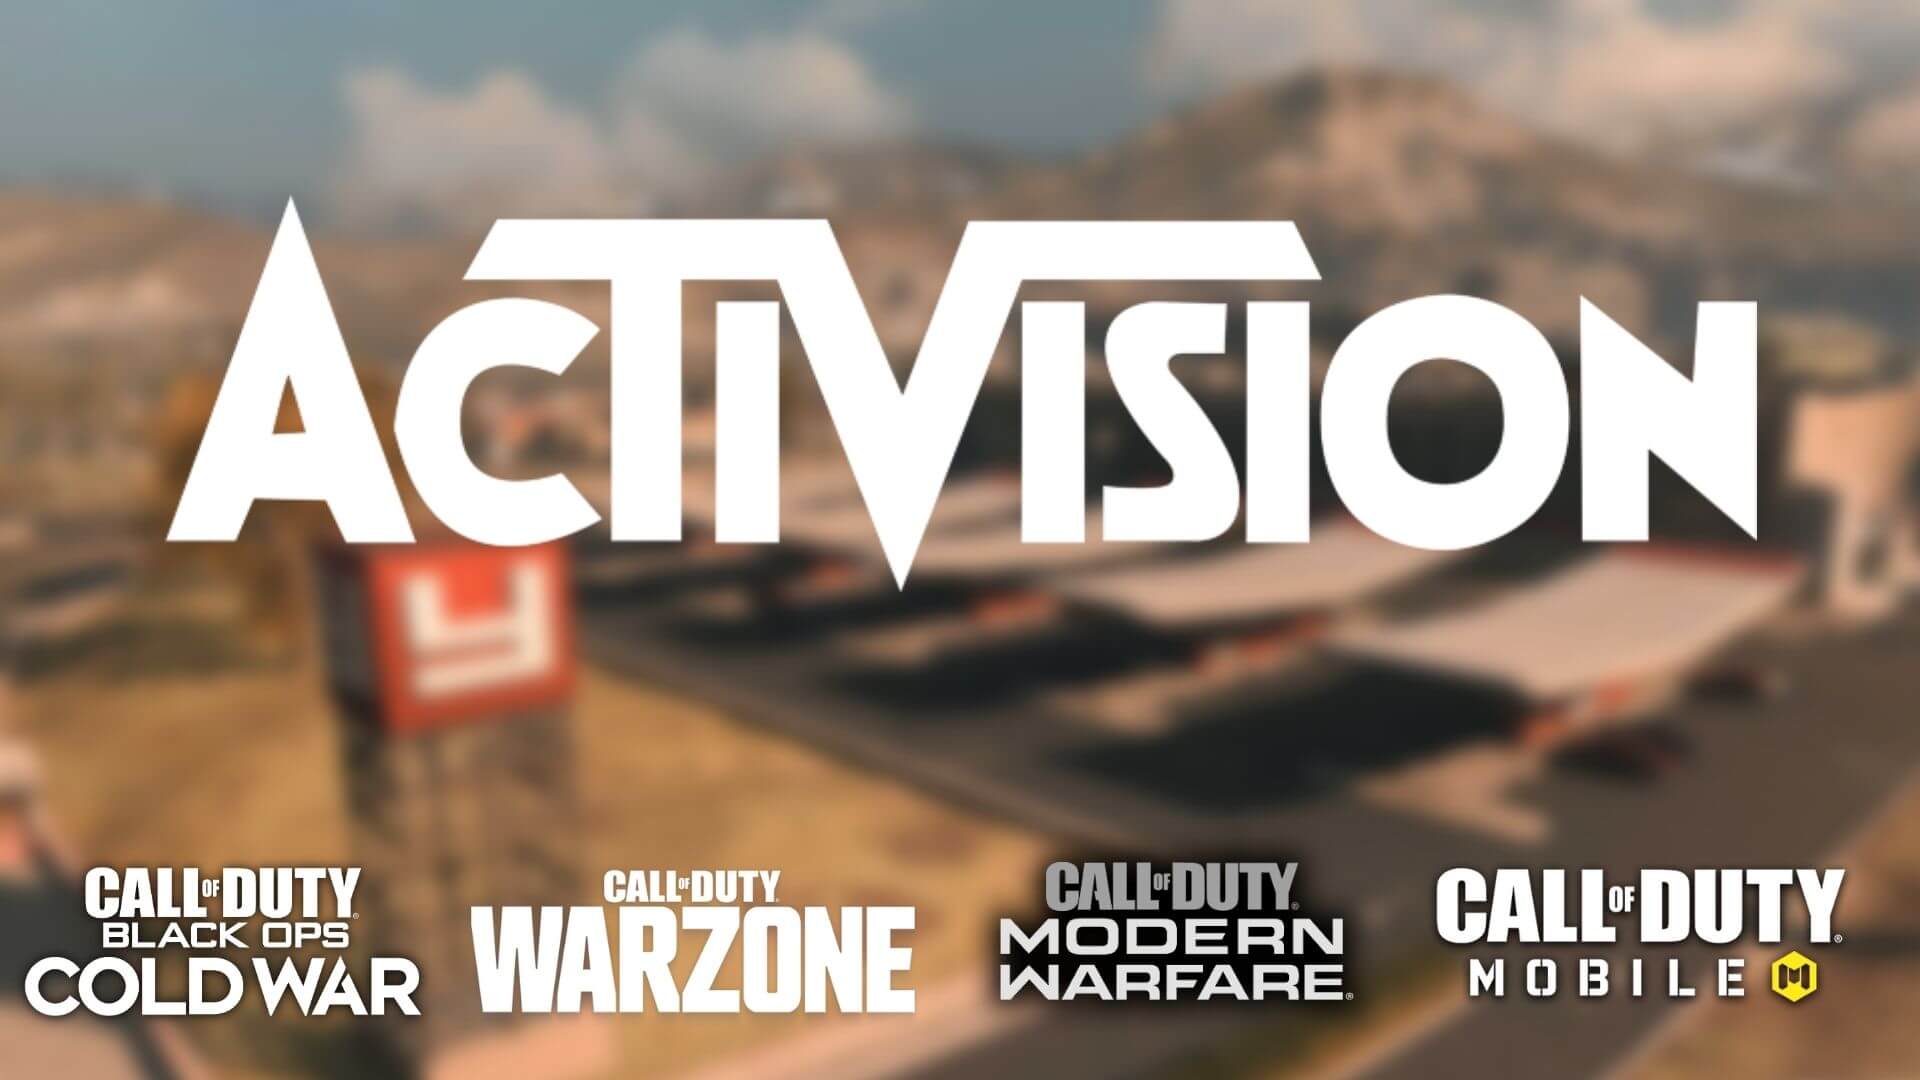 call of duty activision logo